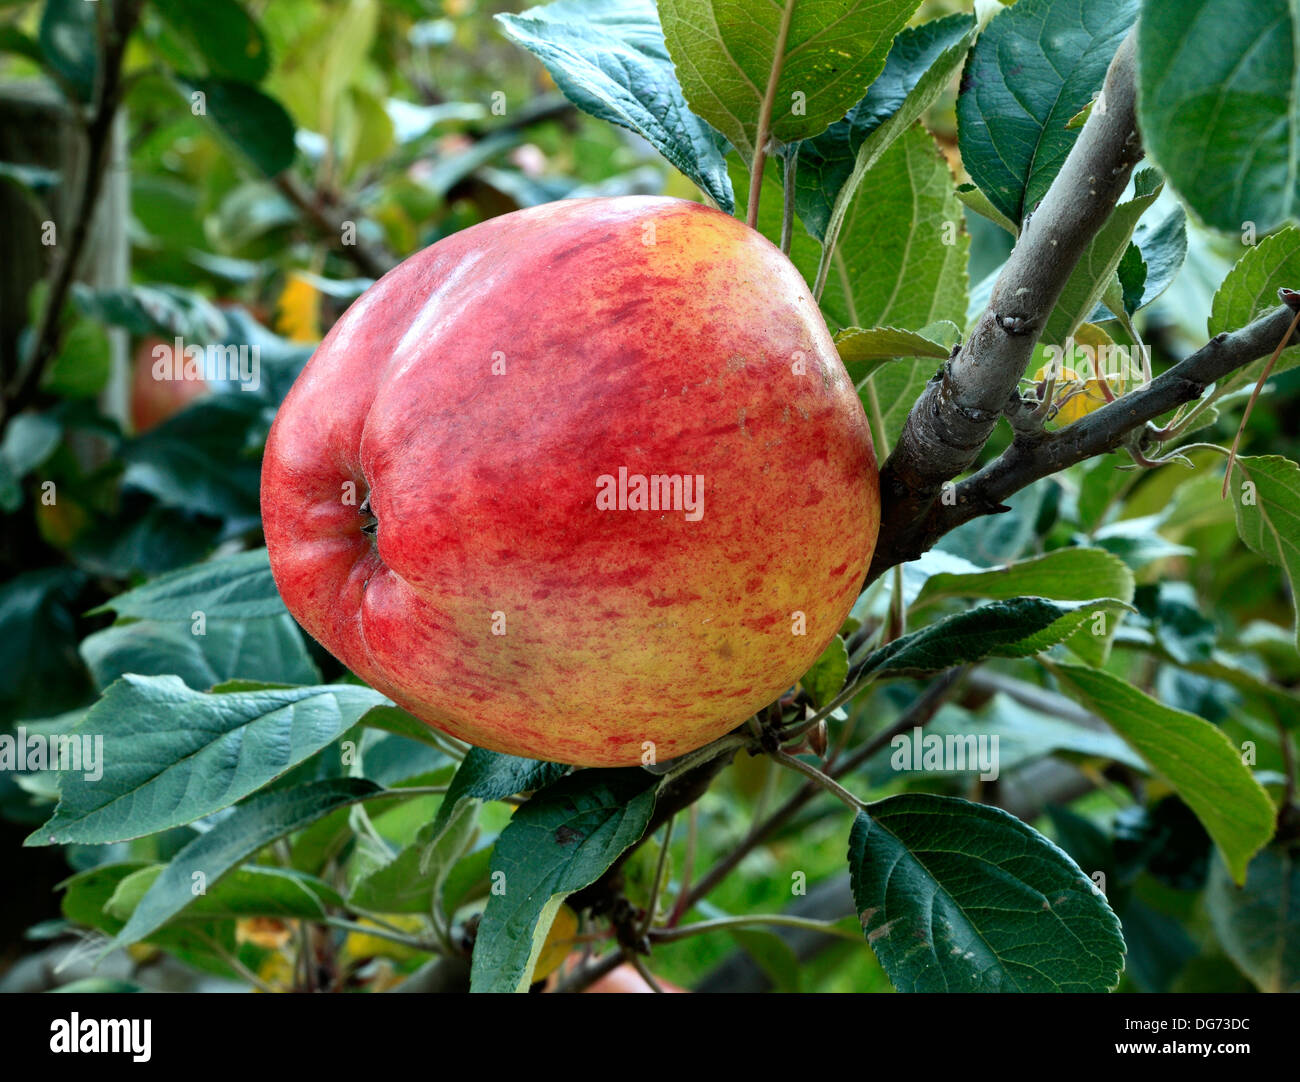 Apple 'Dr. Clifford', culinary variety, malus domestica, apples variety varieties growing on tree Stock Photo